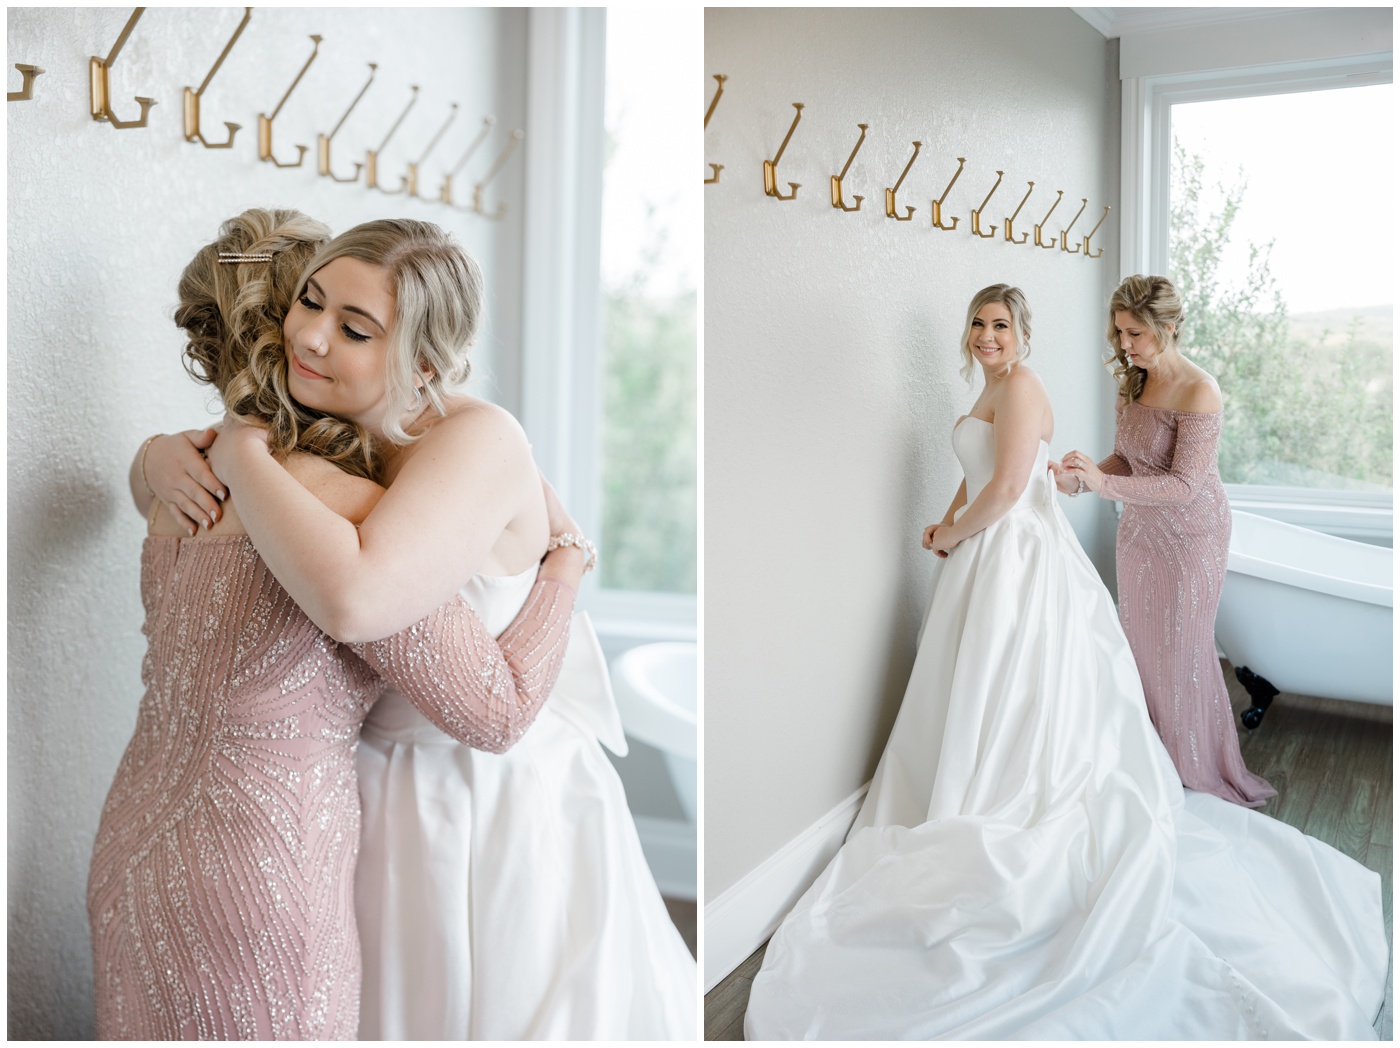 A bride's mom helps her daughter into her wedding dress